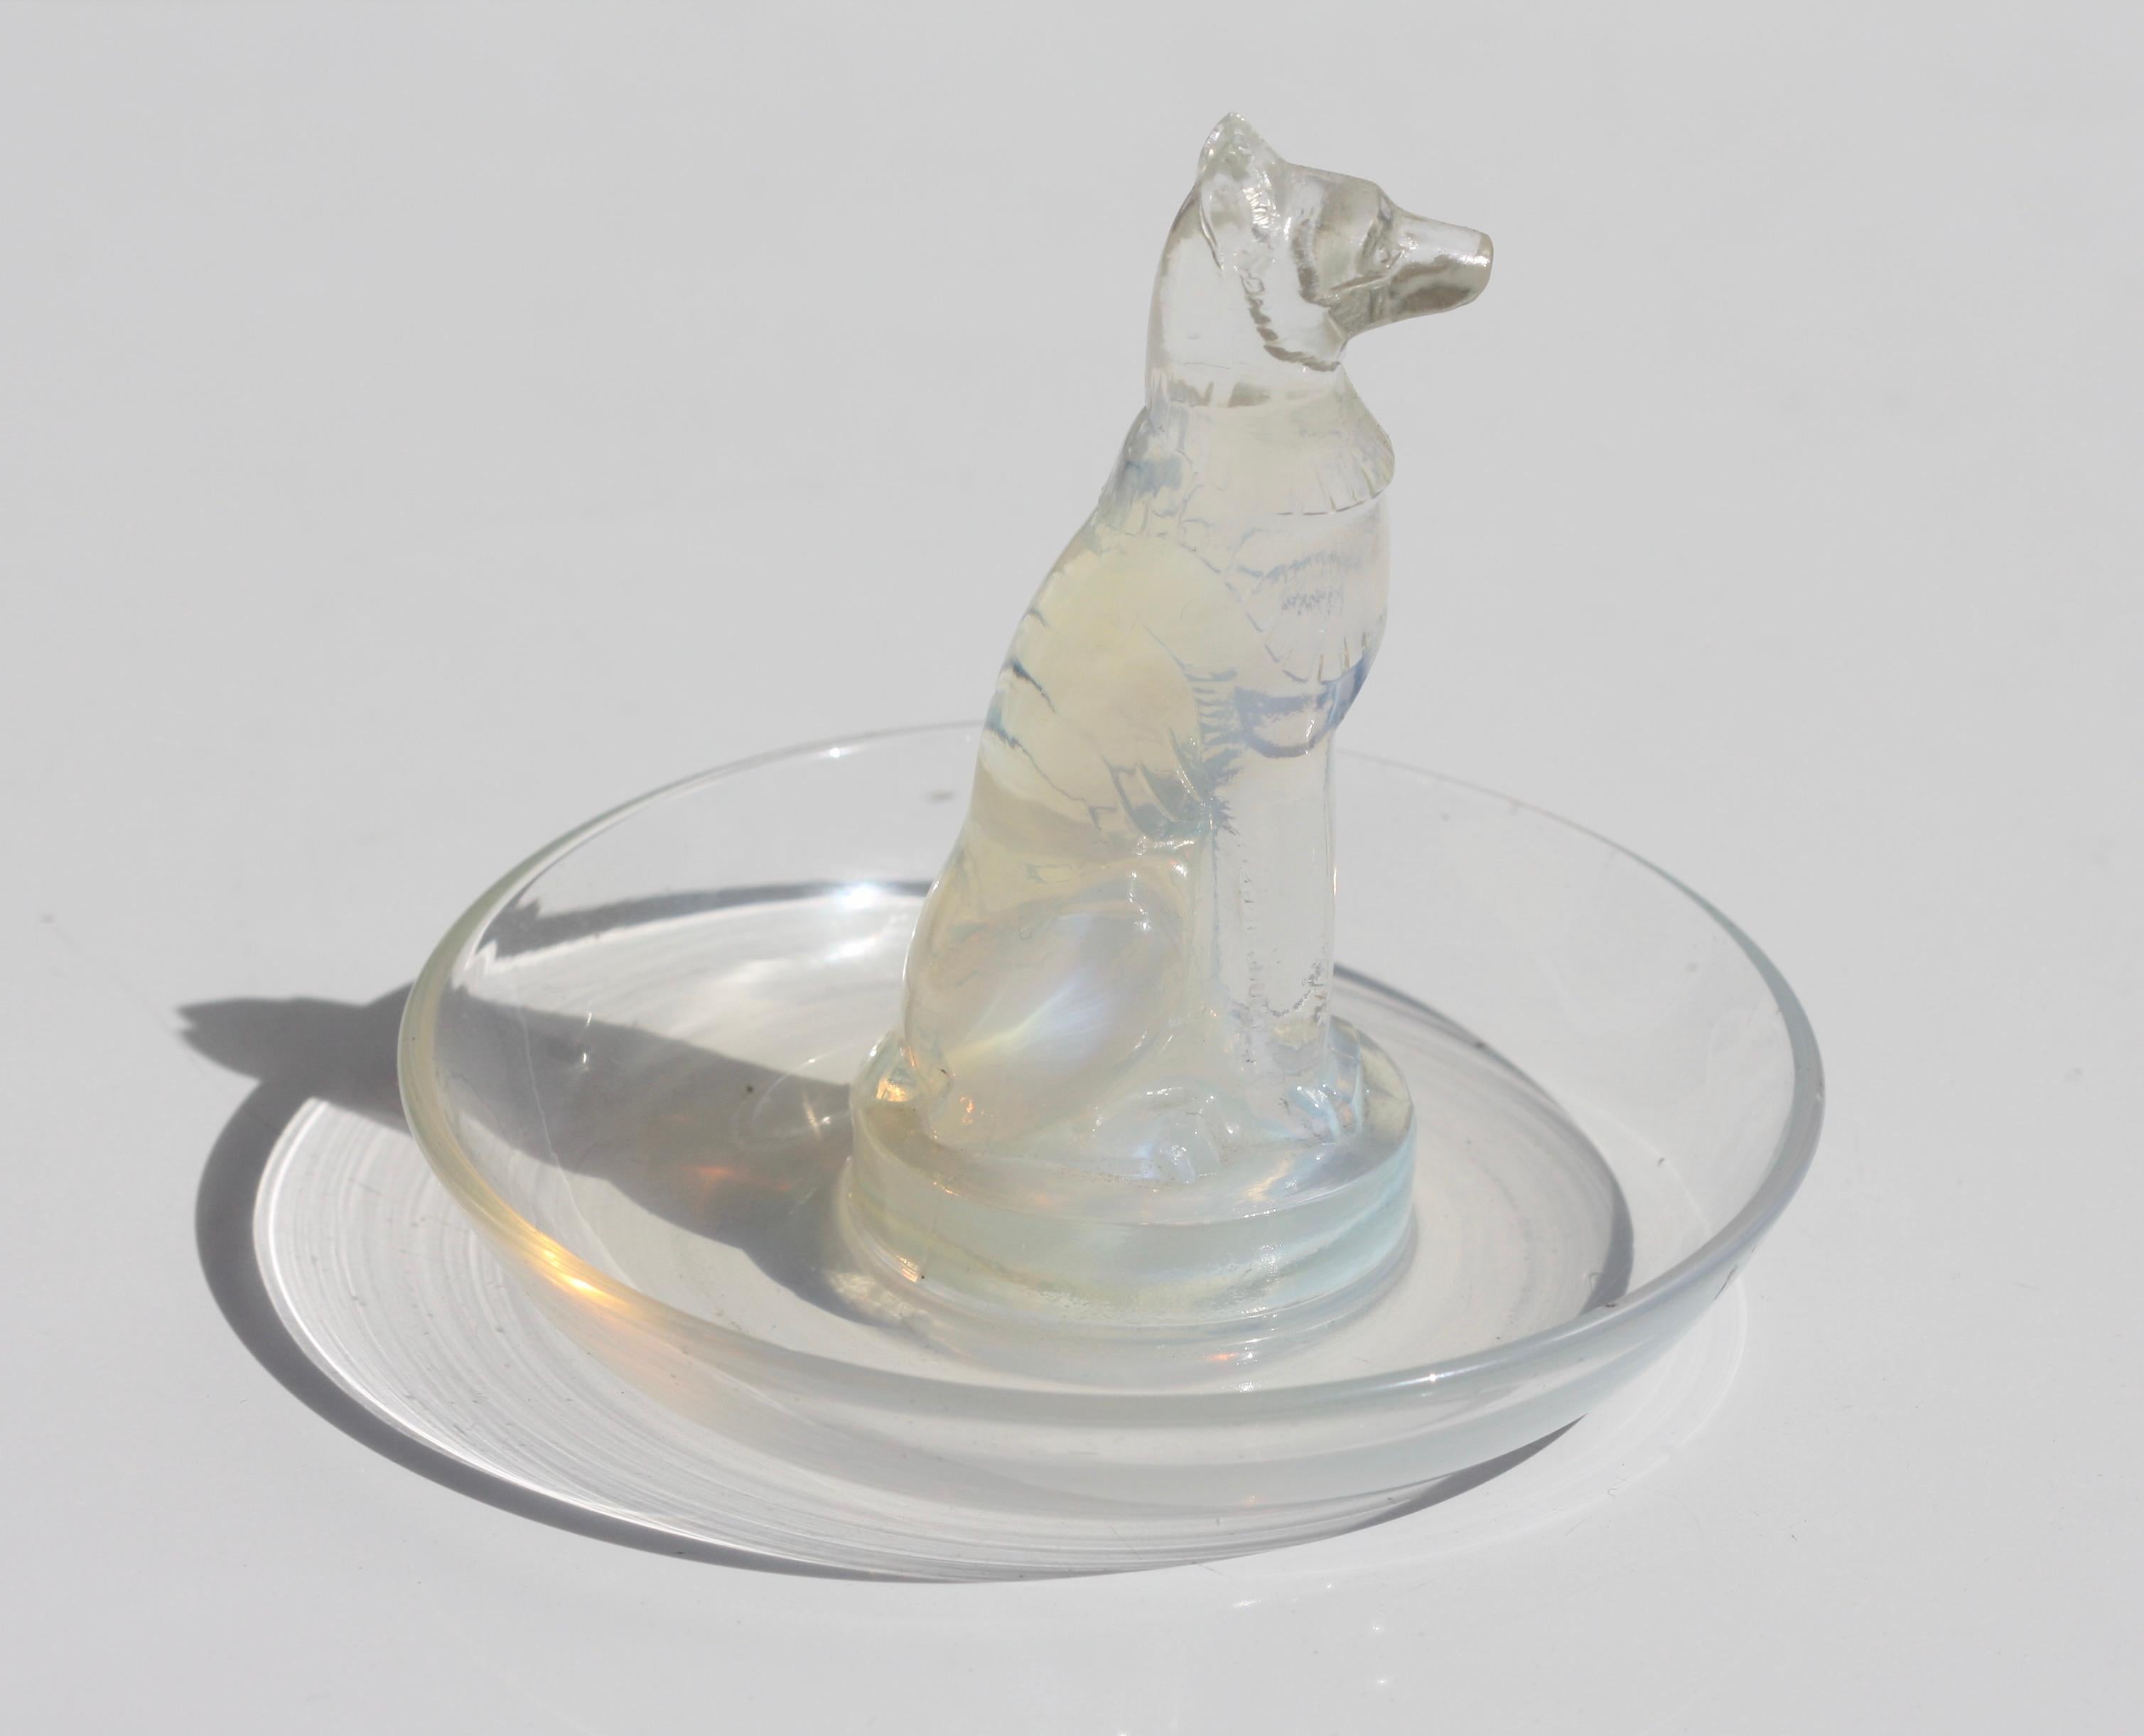 René Lalique (1860-1945)
An opalescent glass cendrier, Marcilhac No. 290, acid stamped R. Lalique
model introduced 1926
3 1/4 in. (8.2 cm) high
3 1/2 in. (8.8 cm) wide.
  